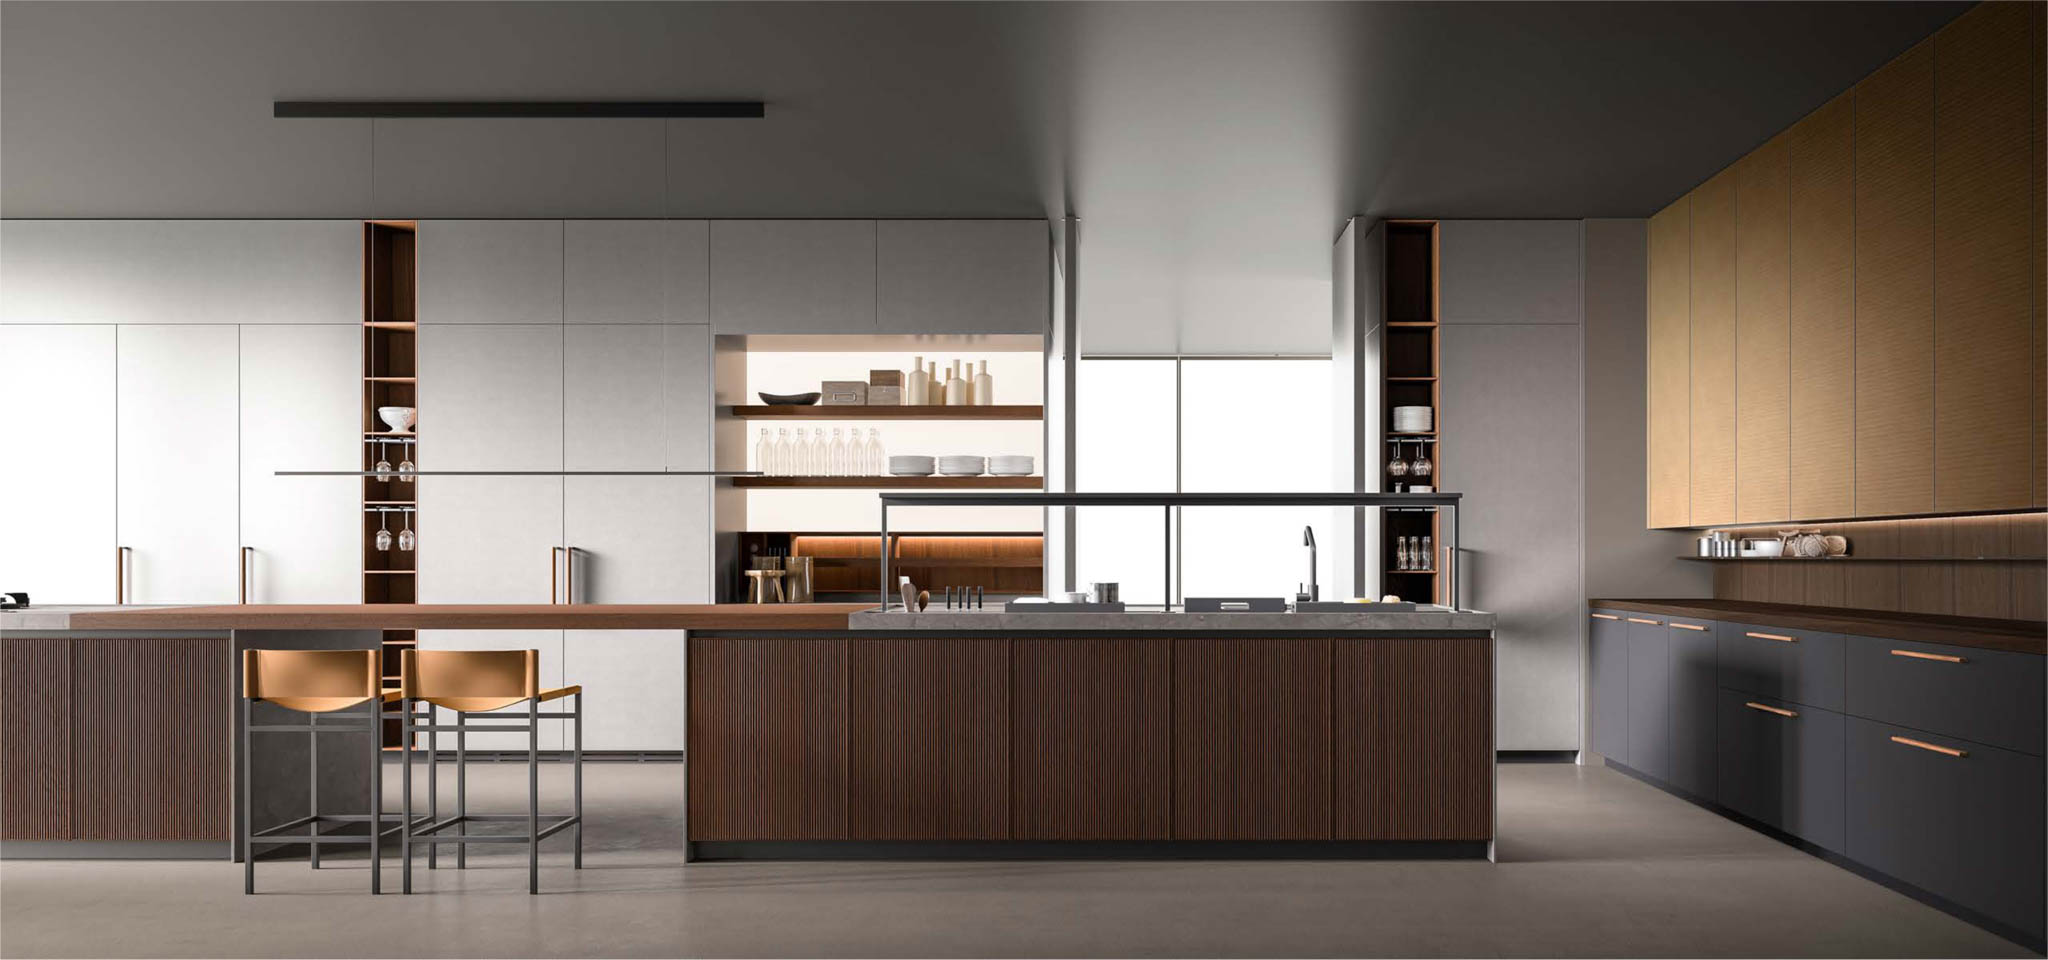 Boffi Xila Kitchen designed by Luigi Massoni - One of the first handleless kitchens in Italy